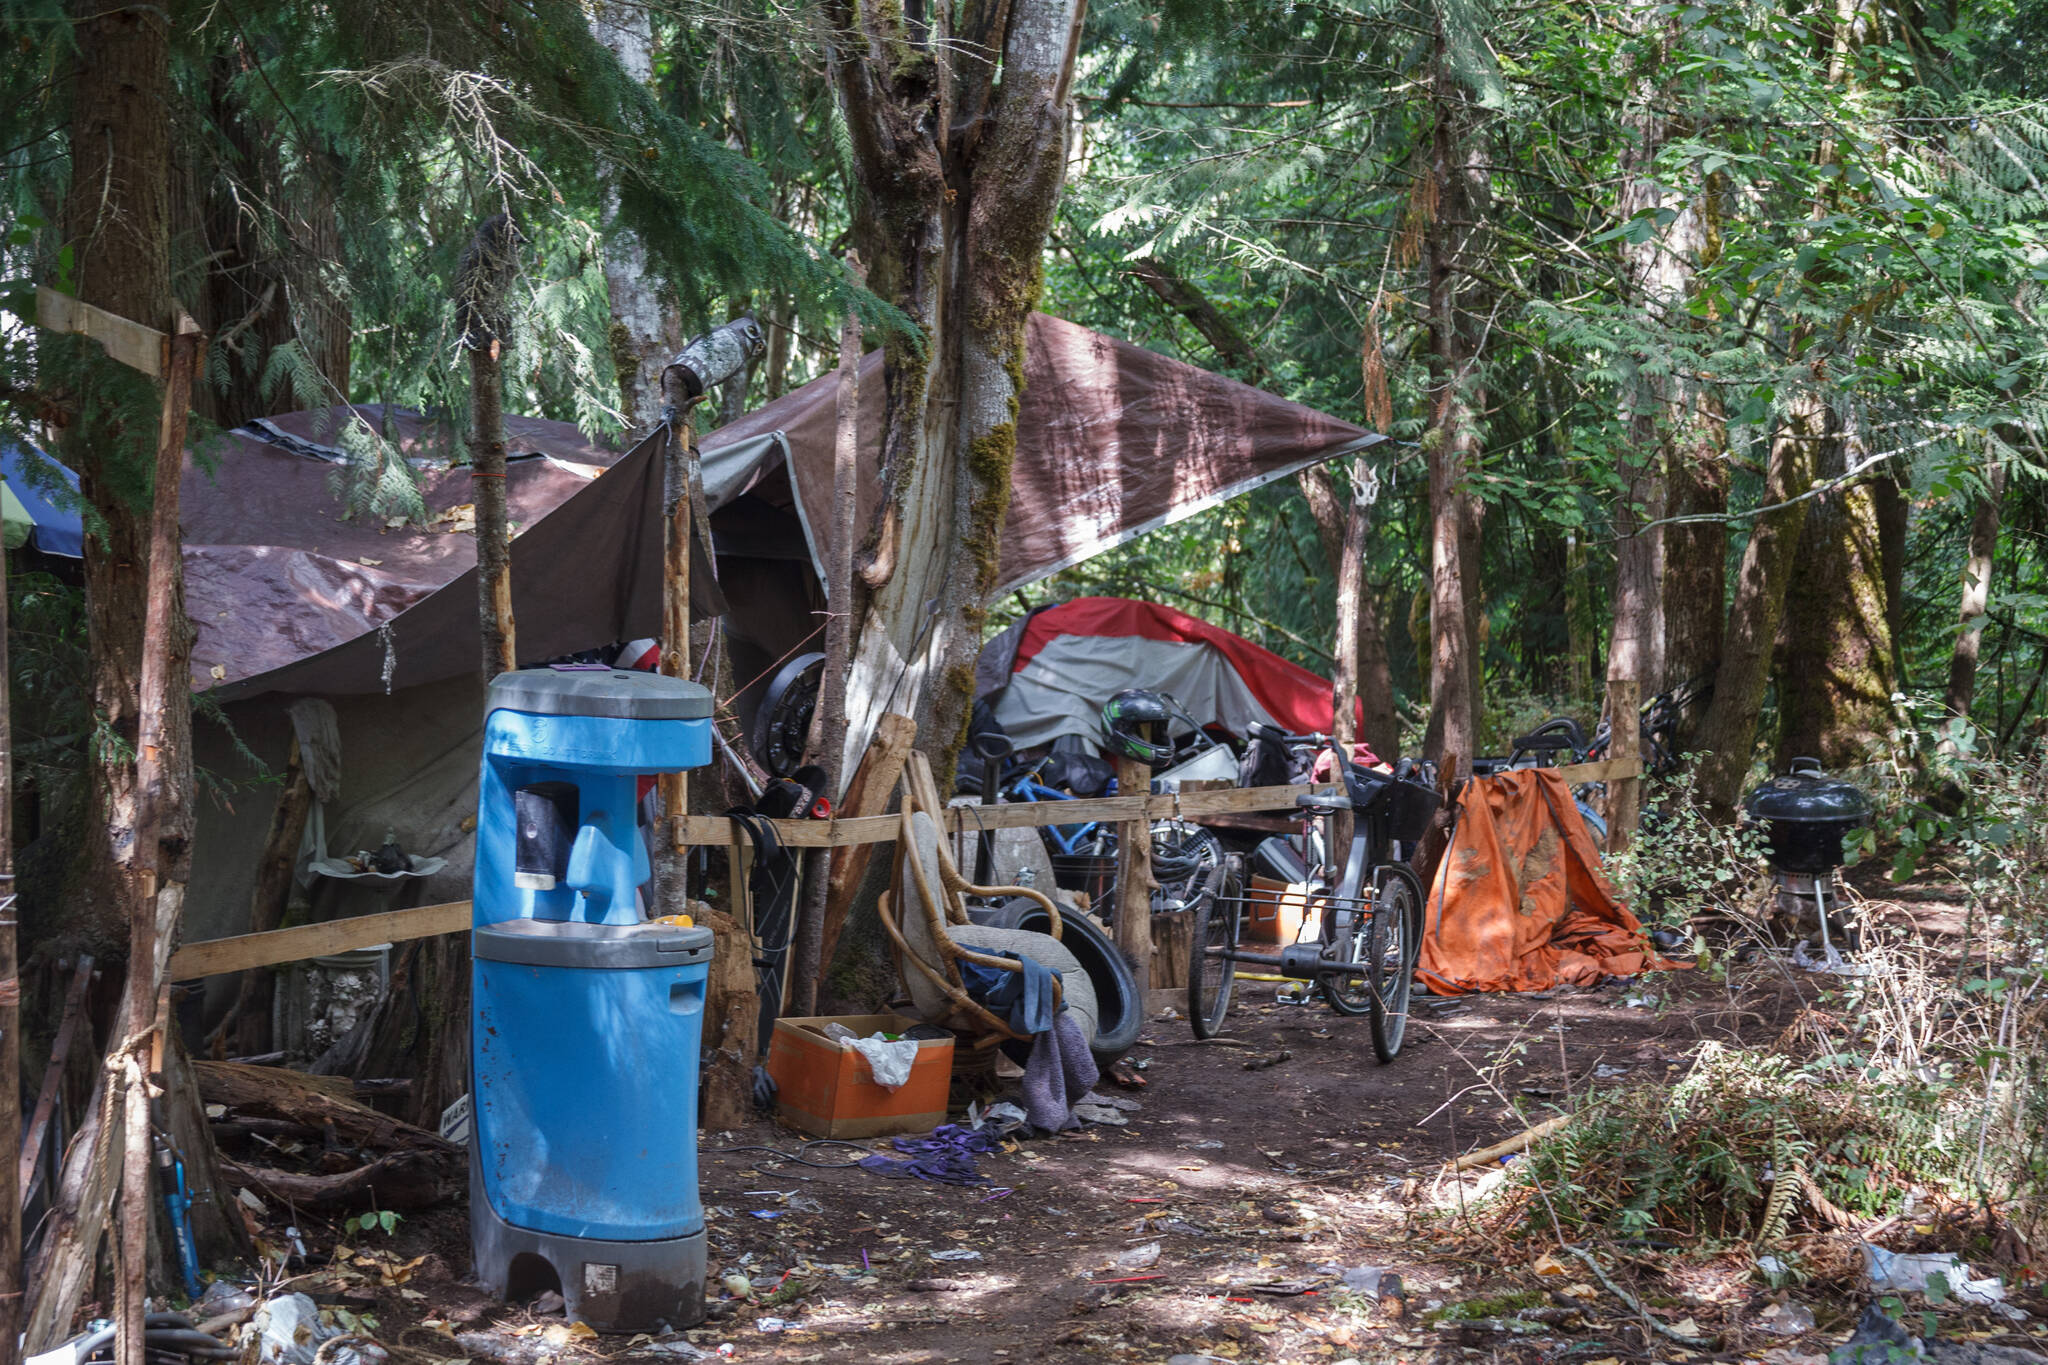 Homeless encampment in wooded area in Auburn on Friday, Aug. 27, 2021. Photo by Henry Stewart-Wood/Sound Publishing